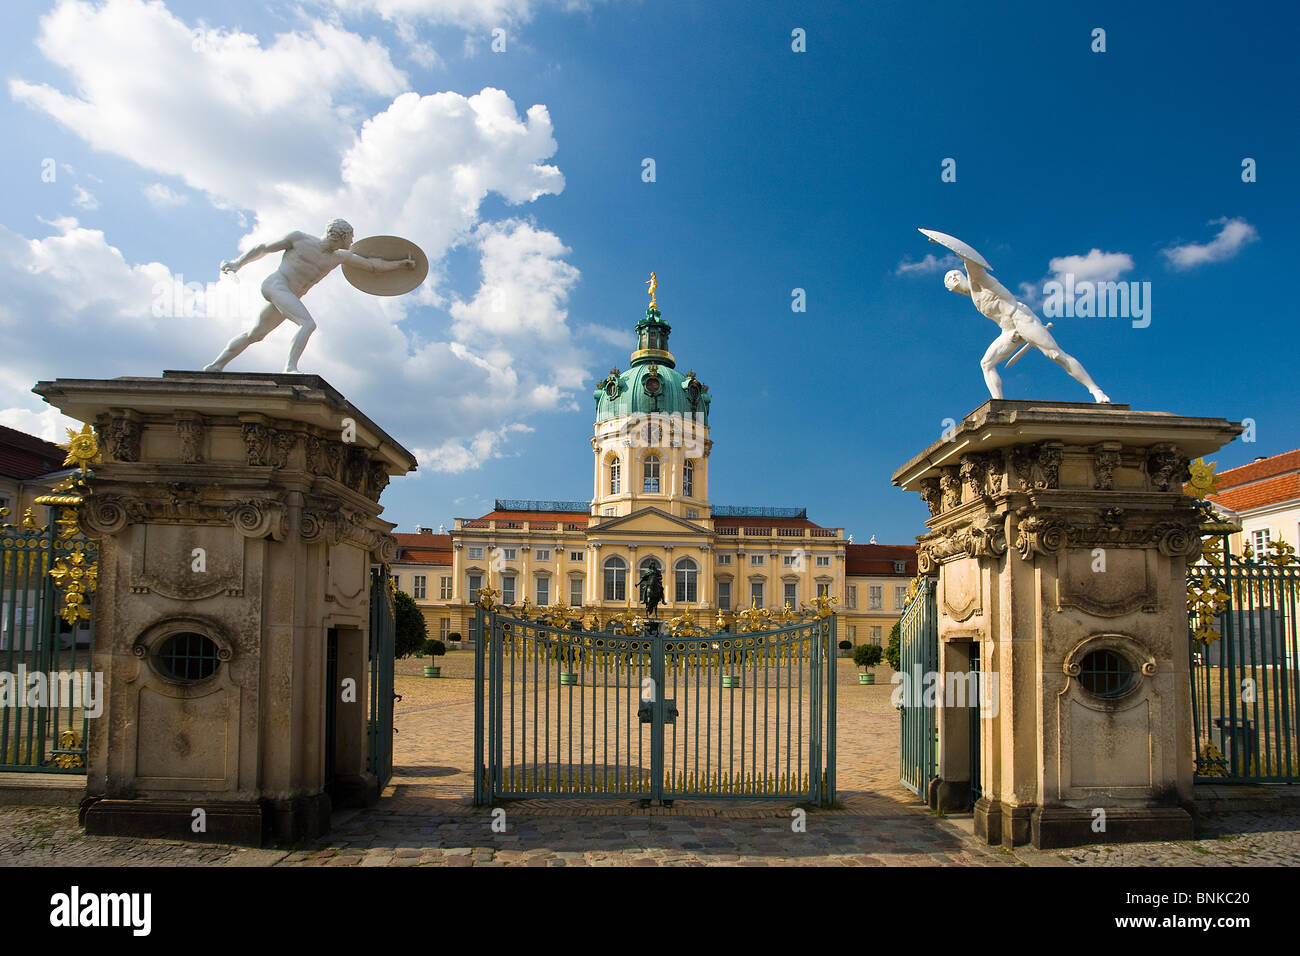 Germany Berlin town city Charlottenburg castle gate statues travel tourism holidays vacation Stock Photo